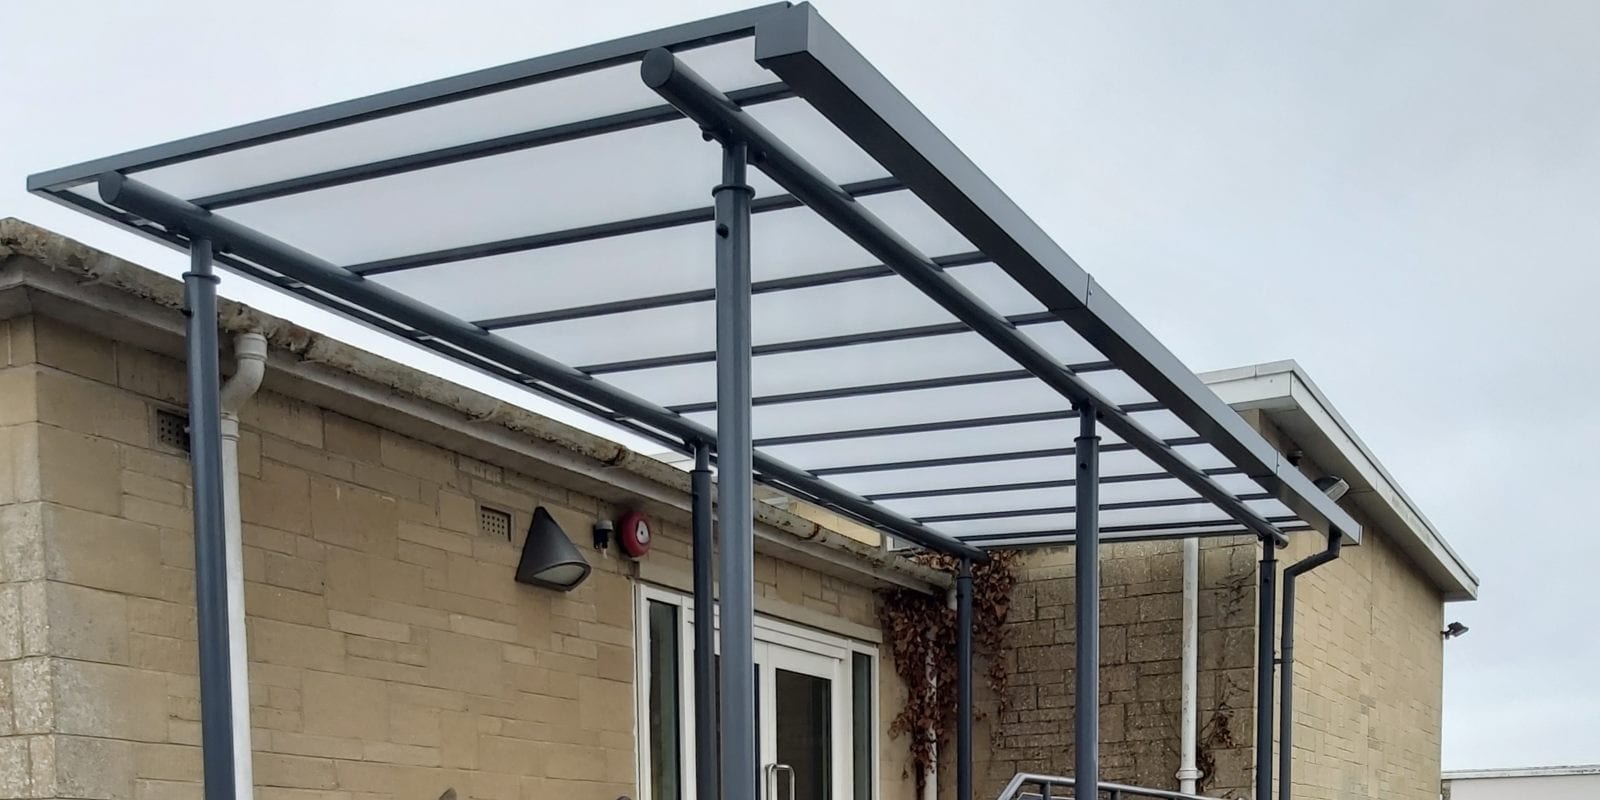 Cirencester Primary School Straight Roof Shelter